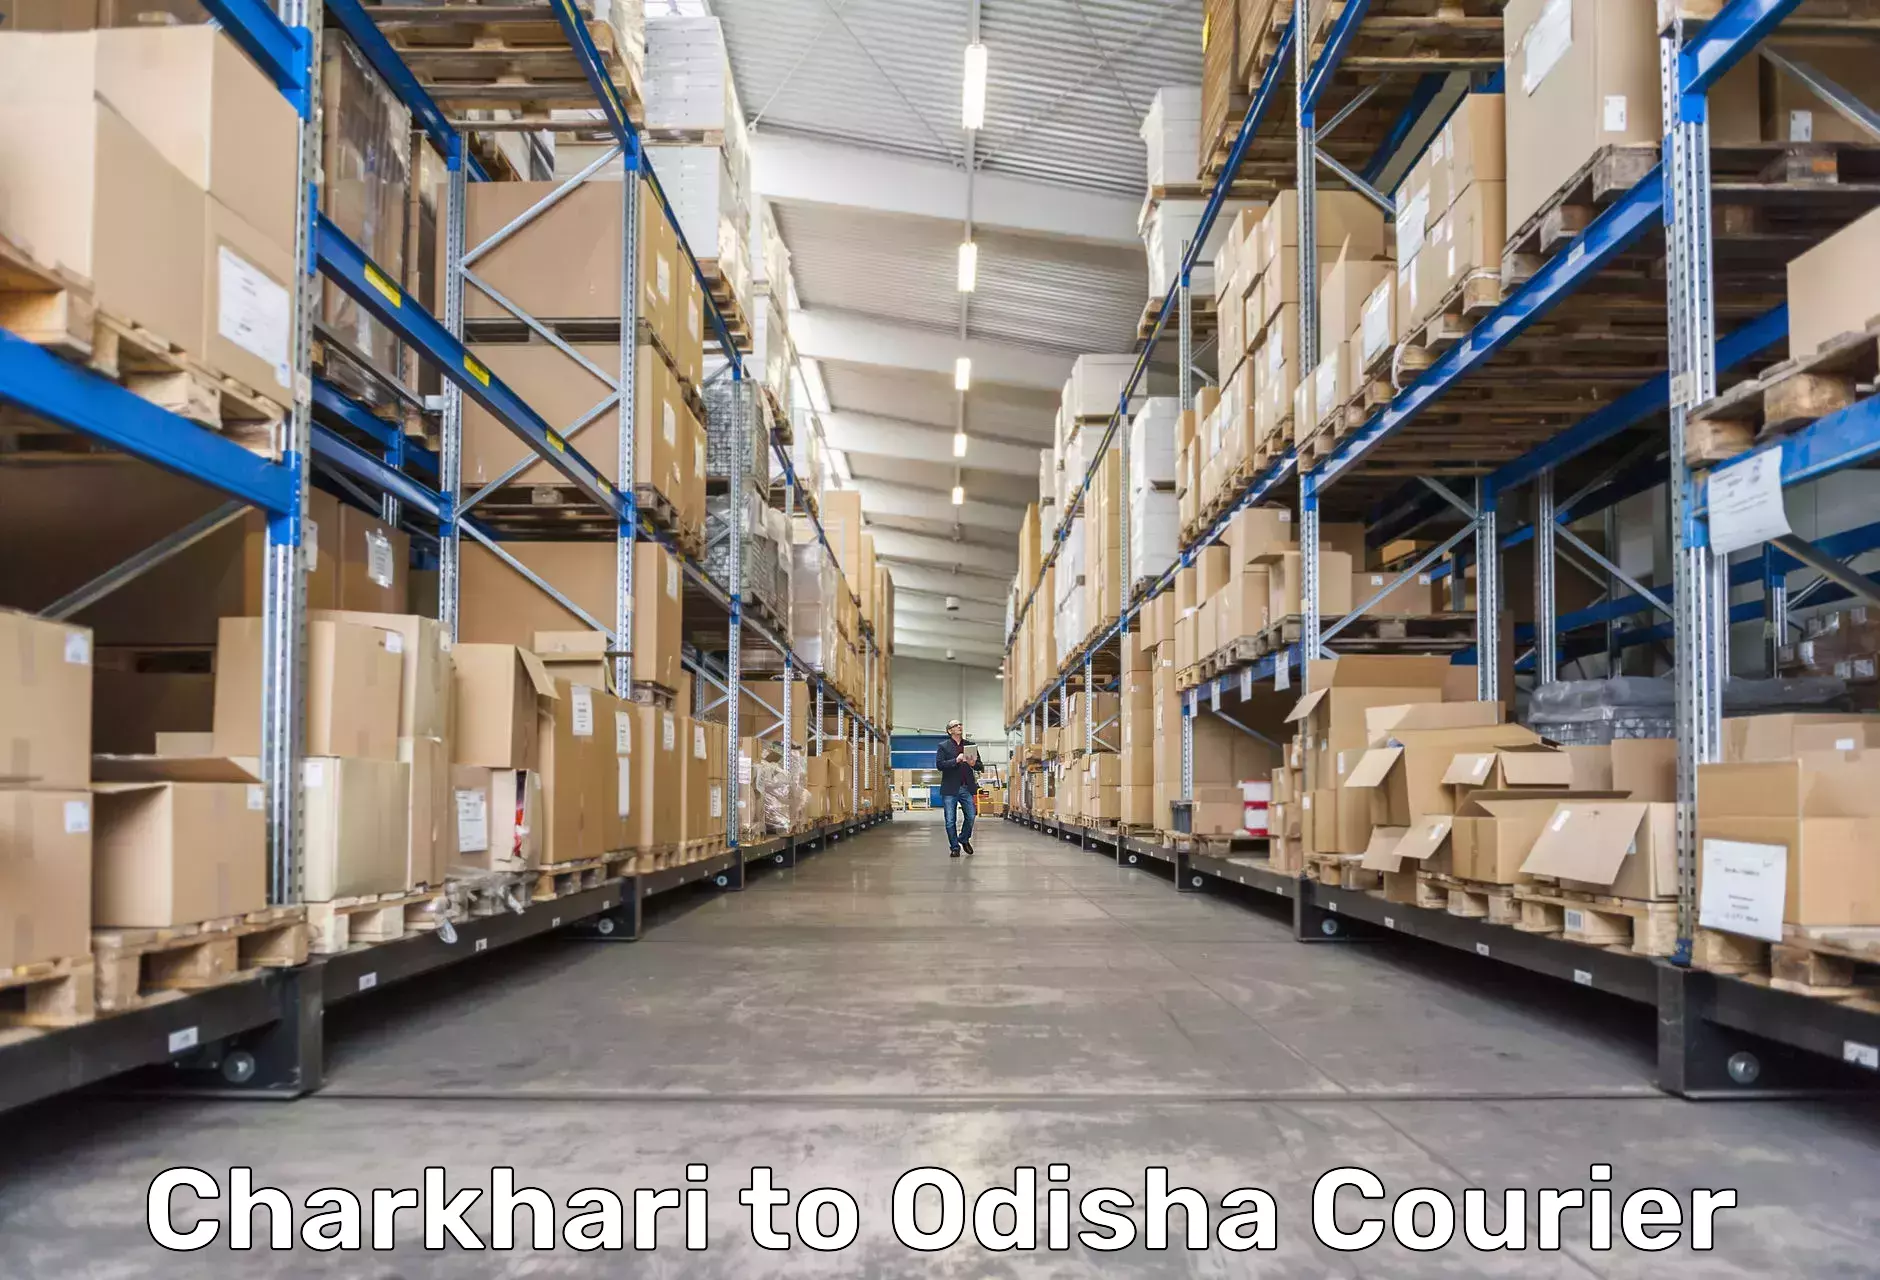 Ocean freight courier Charkhari to Paradip Port